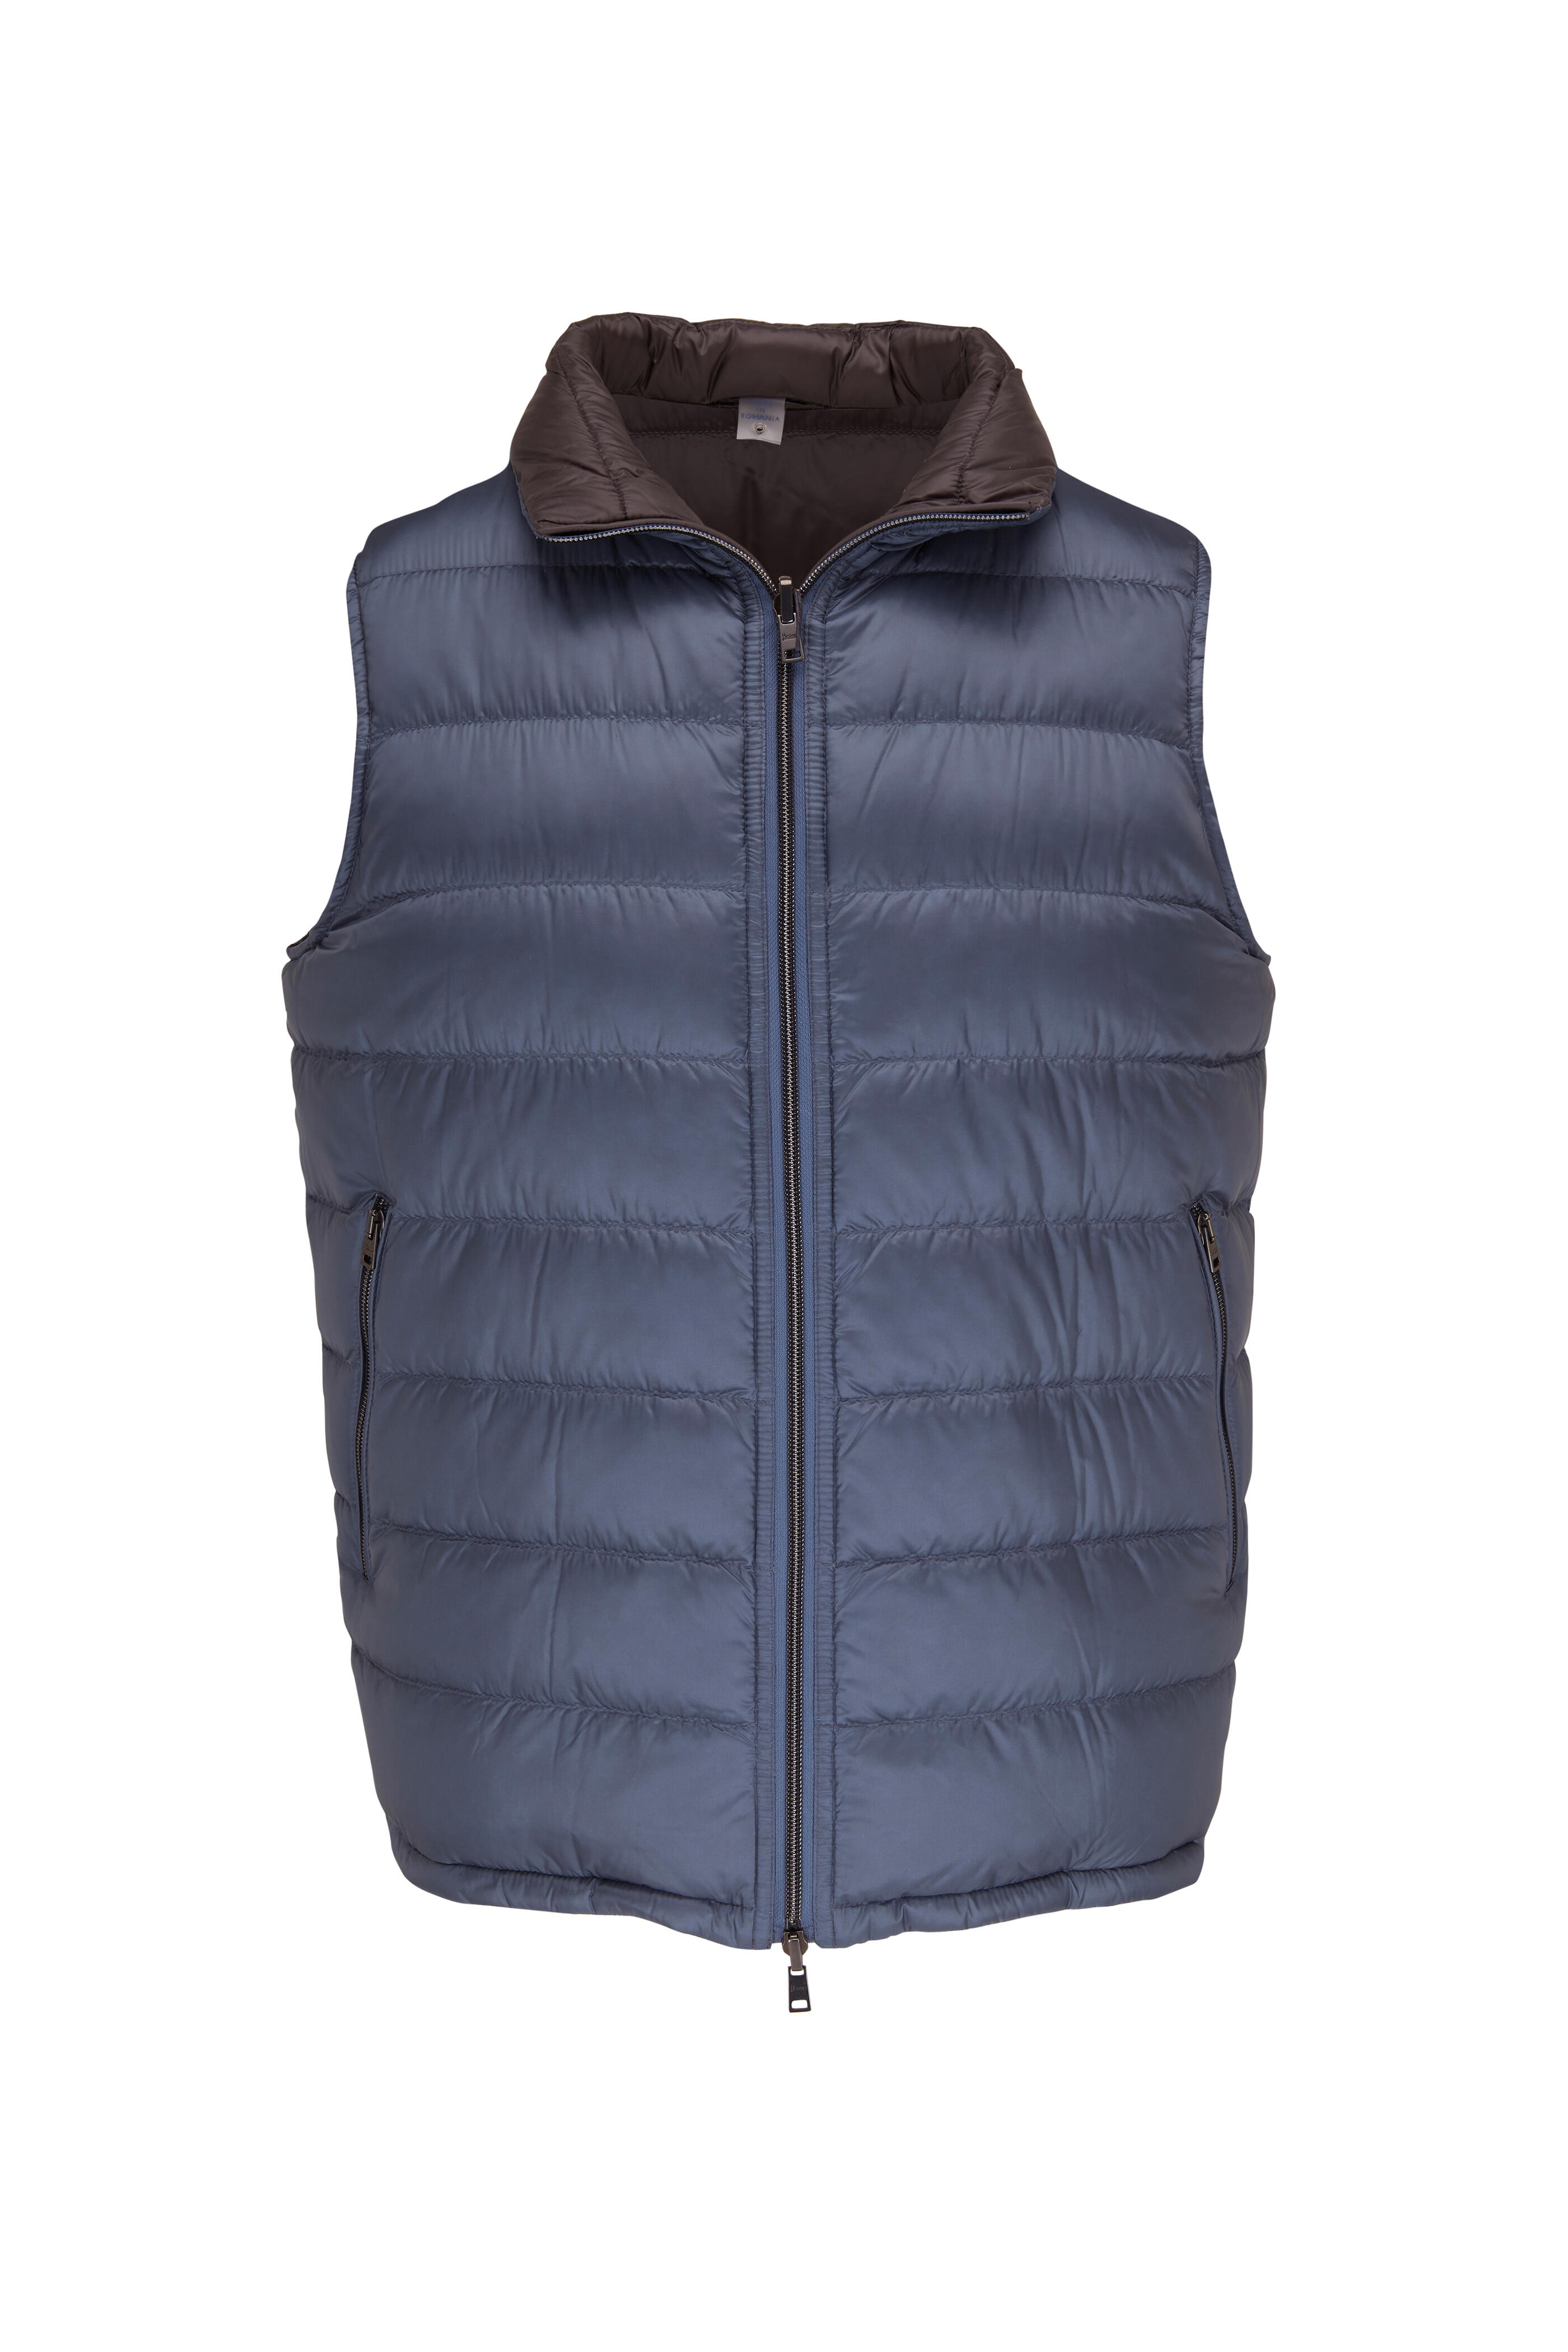 Herno - Blue & Charcoal Reversible Down Vest | Mitchell Stores